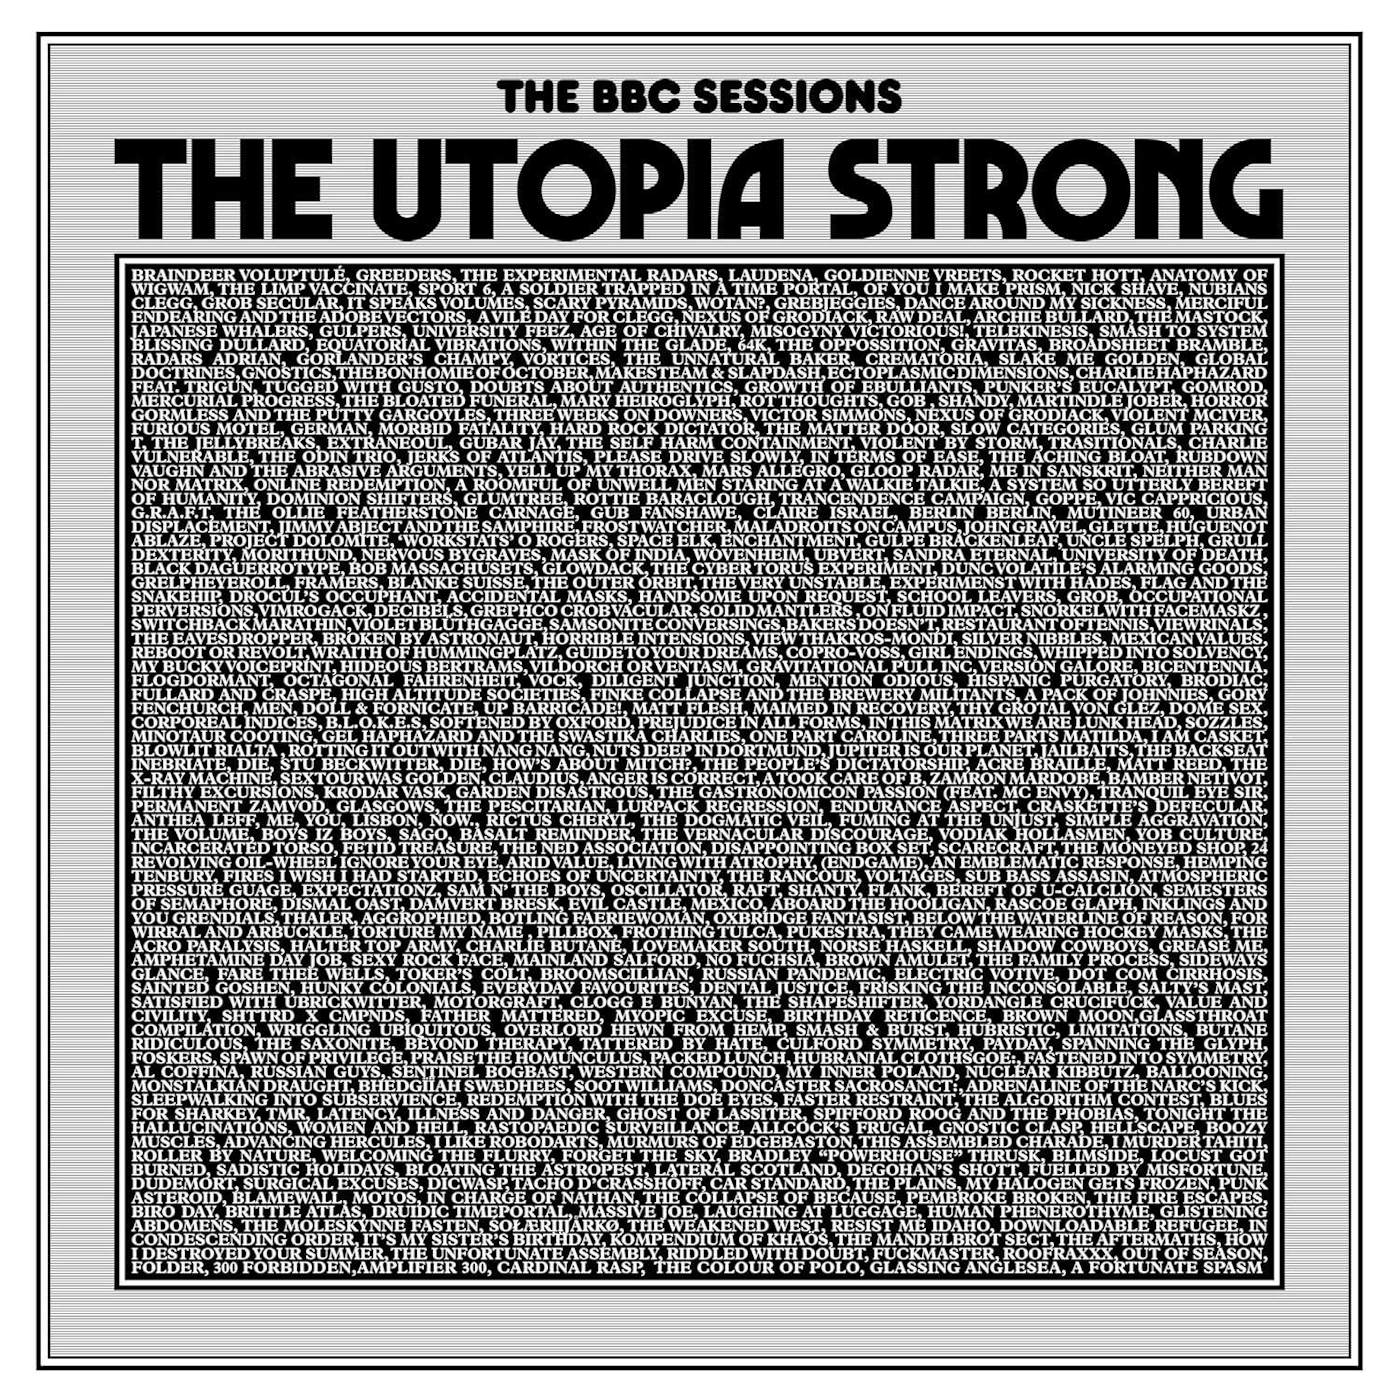 The Utopia Strong The BBC Sessions Vinyl Record